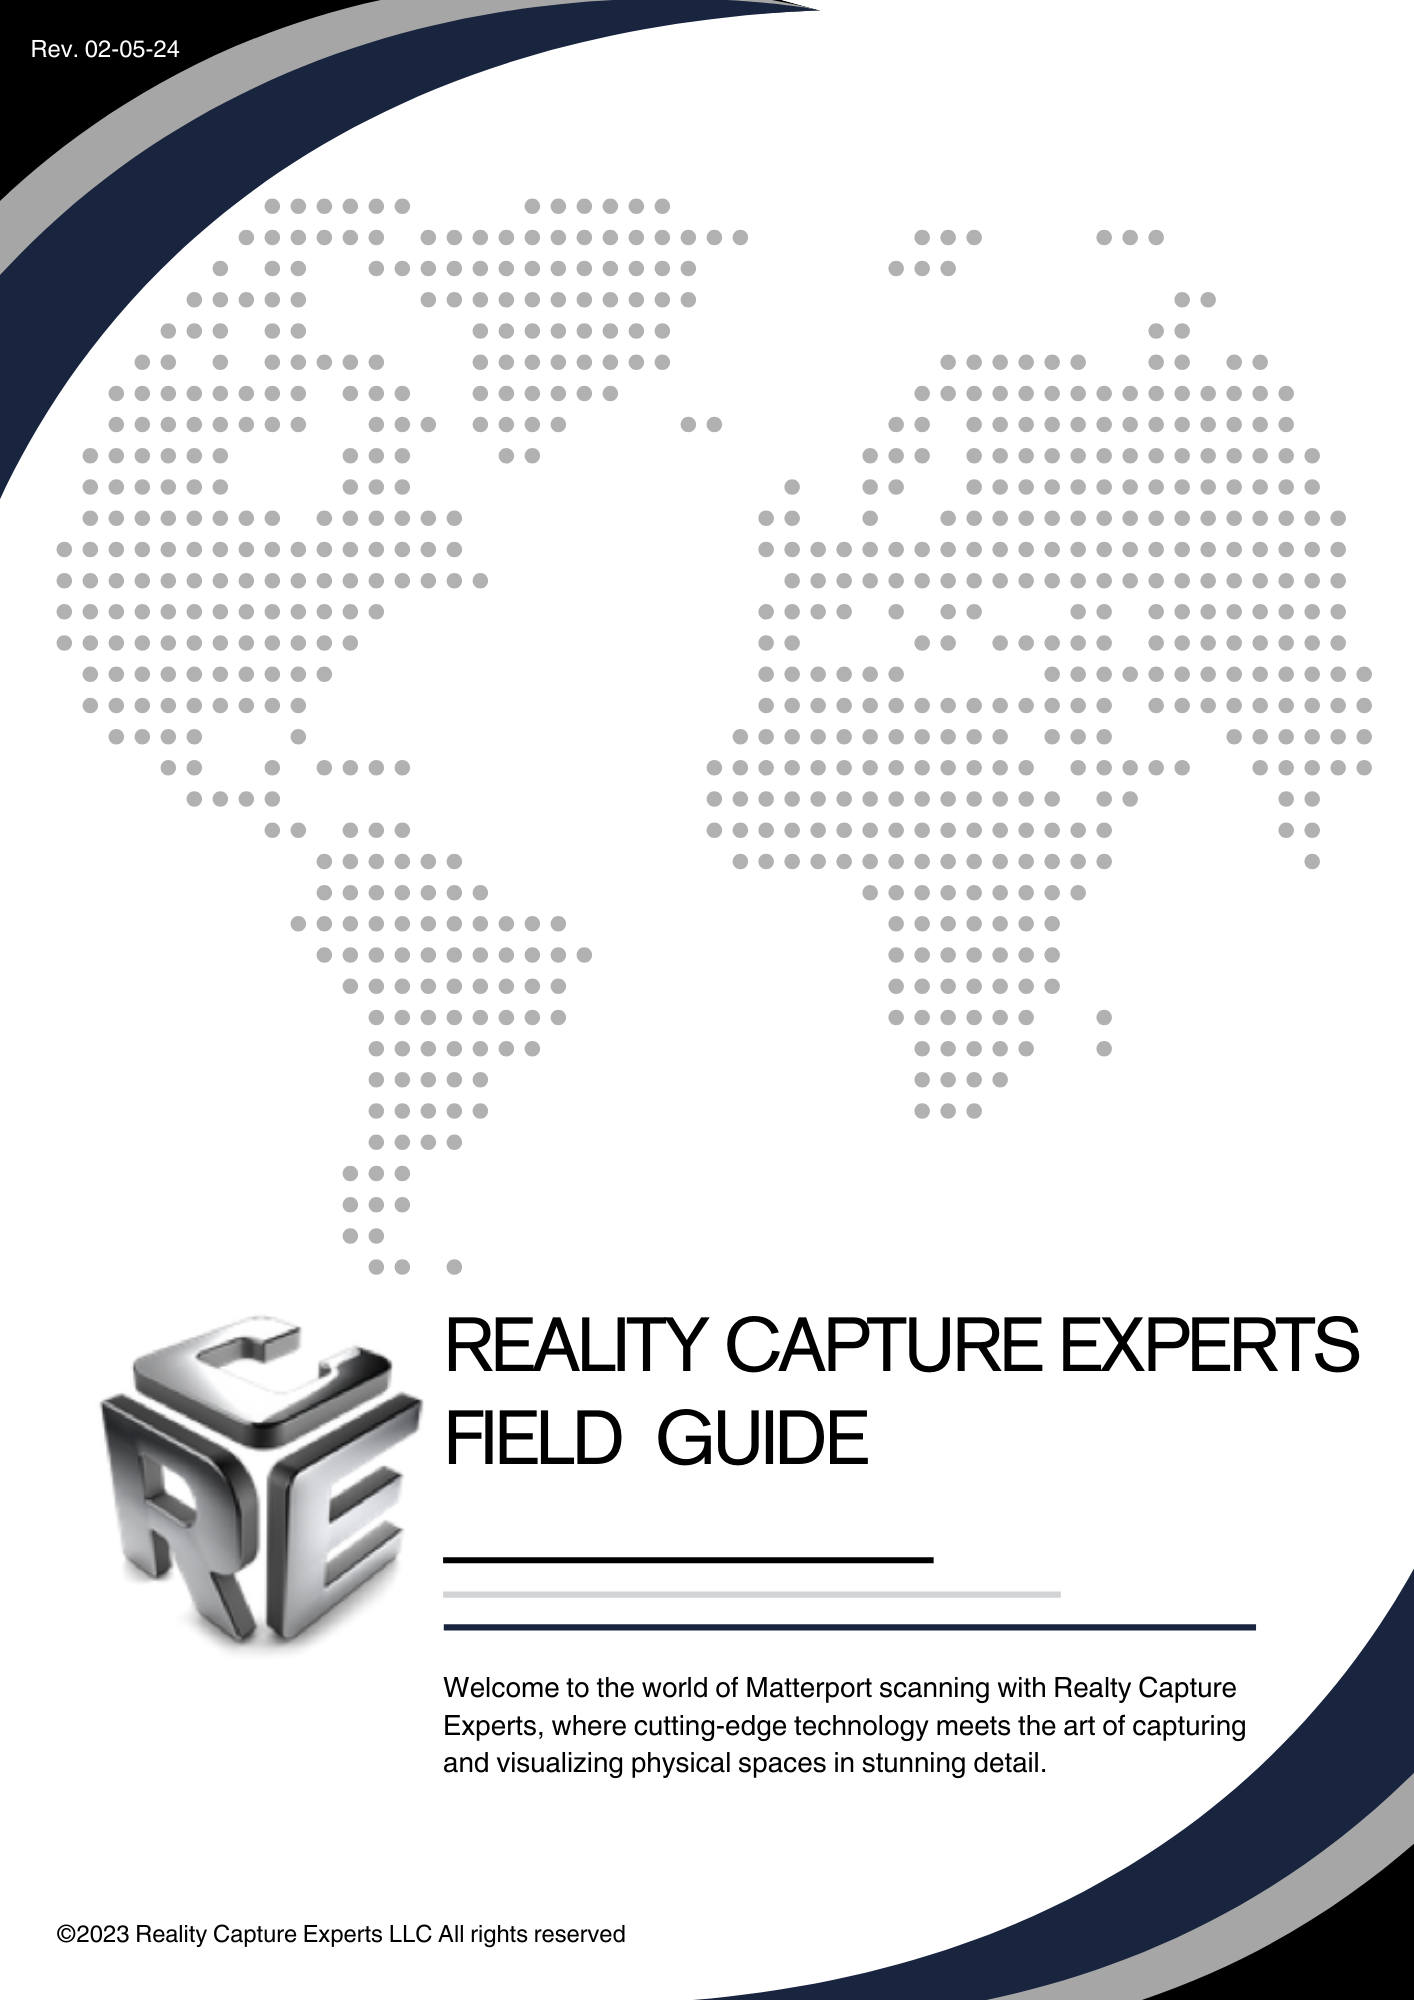 Reality Capture Experts Field Guide